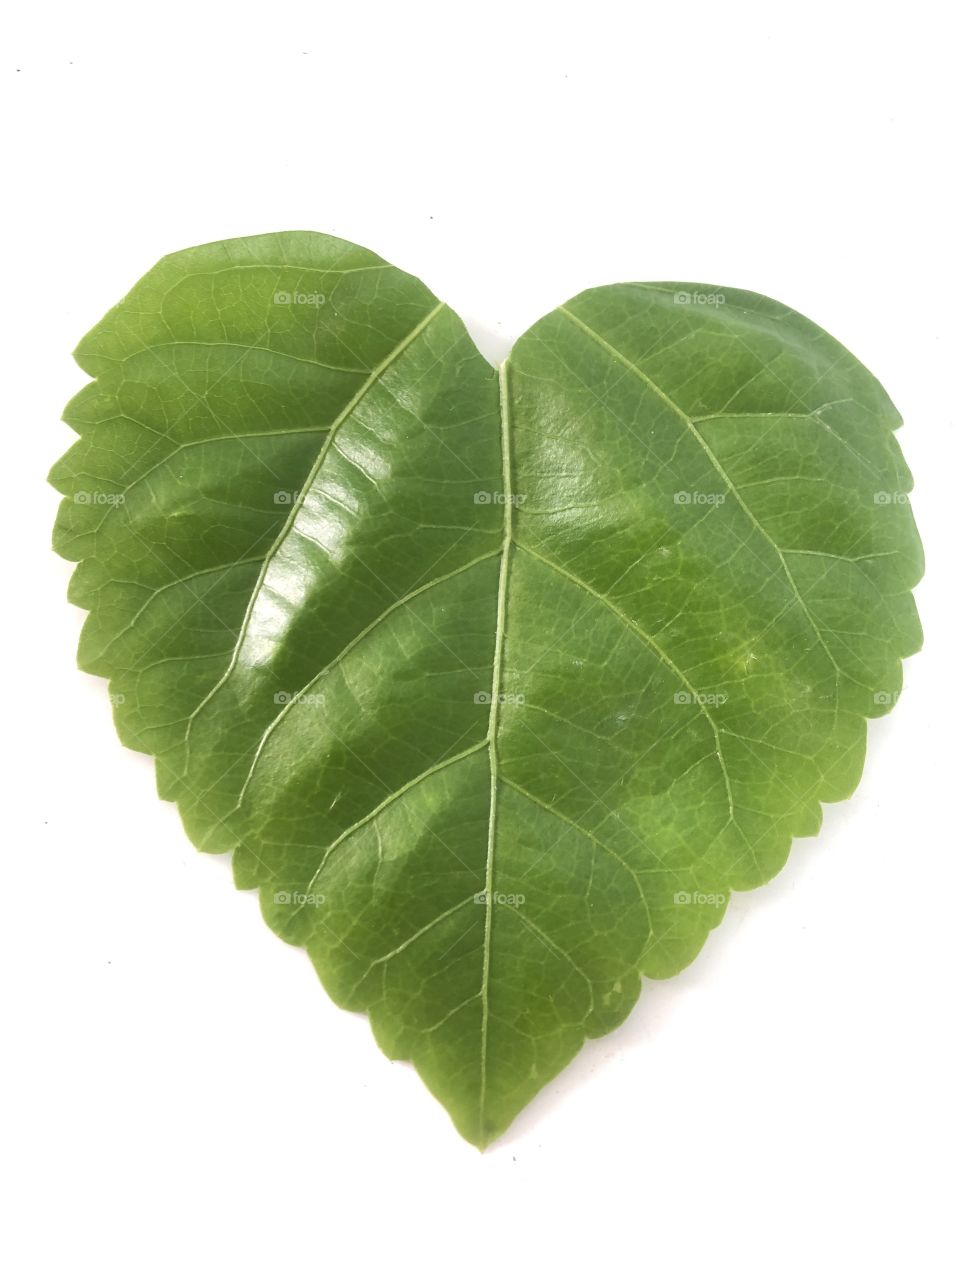 A portrait of a heart shaped leaf on a white background, no editing. Some creativity make life fun sometimes